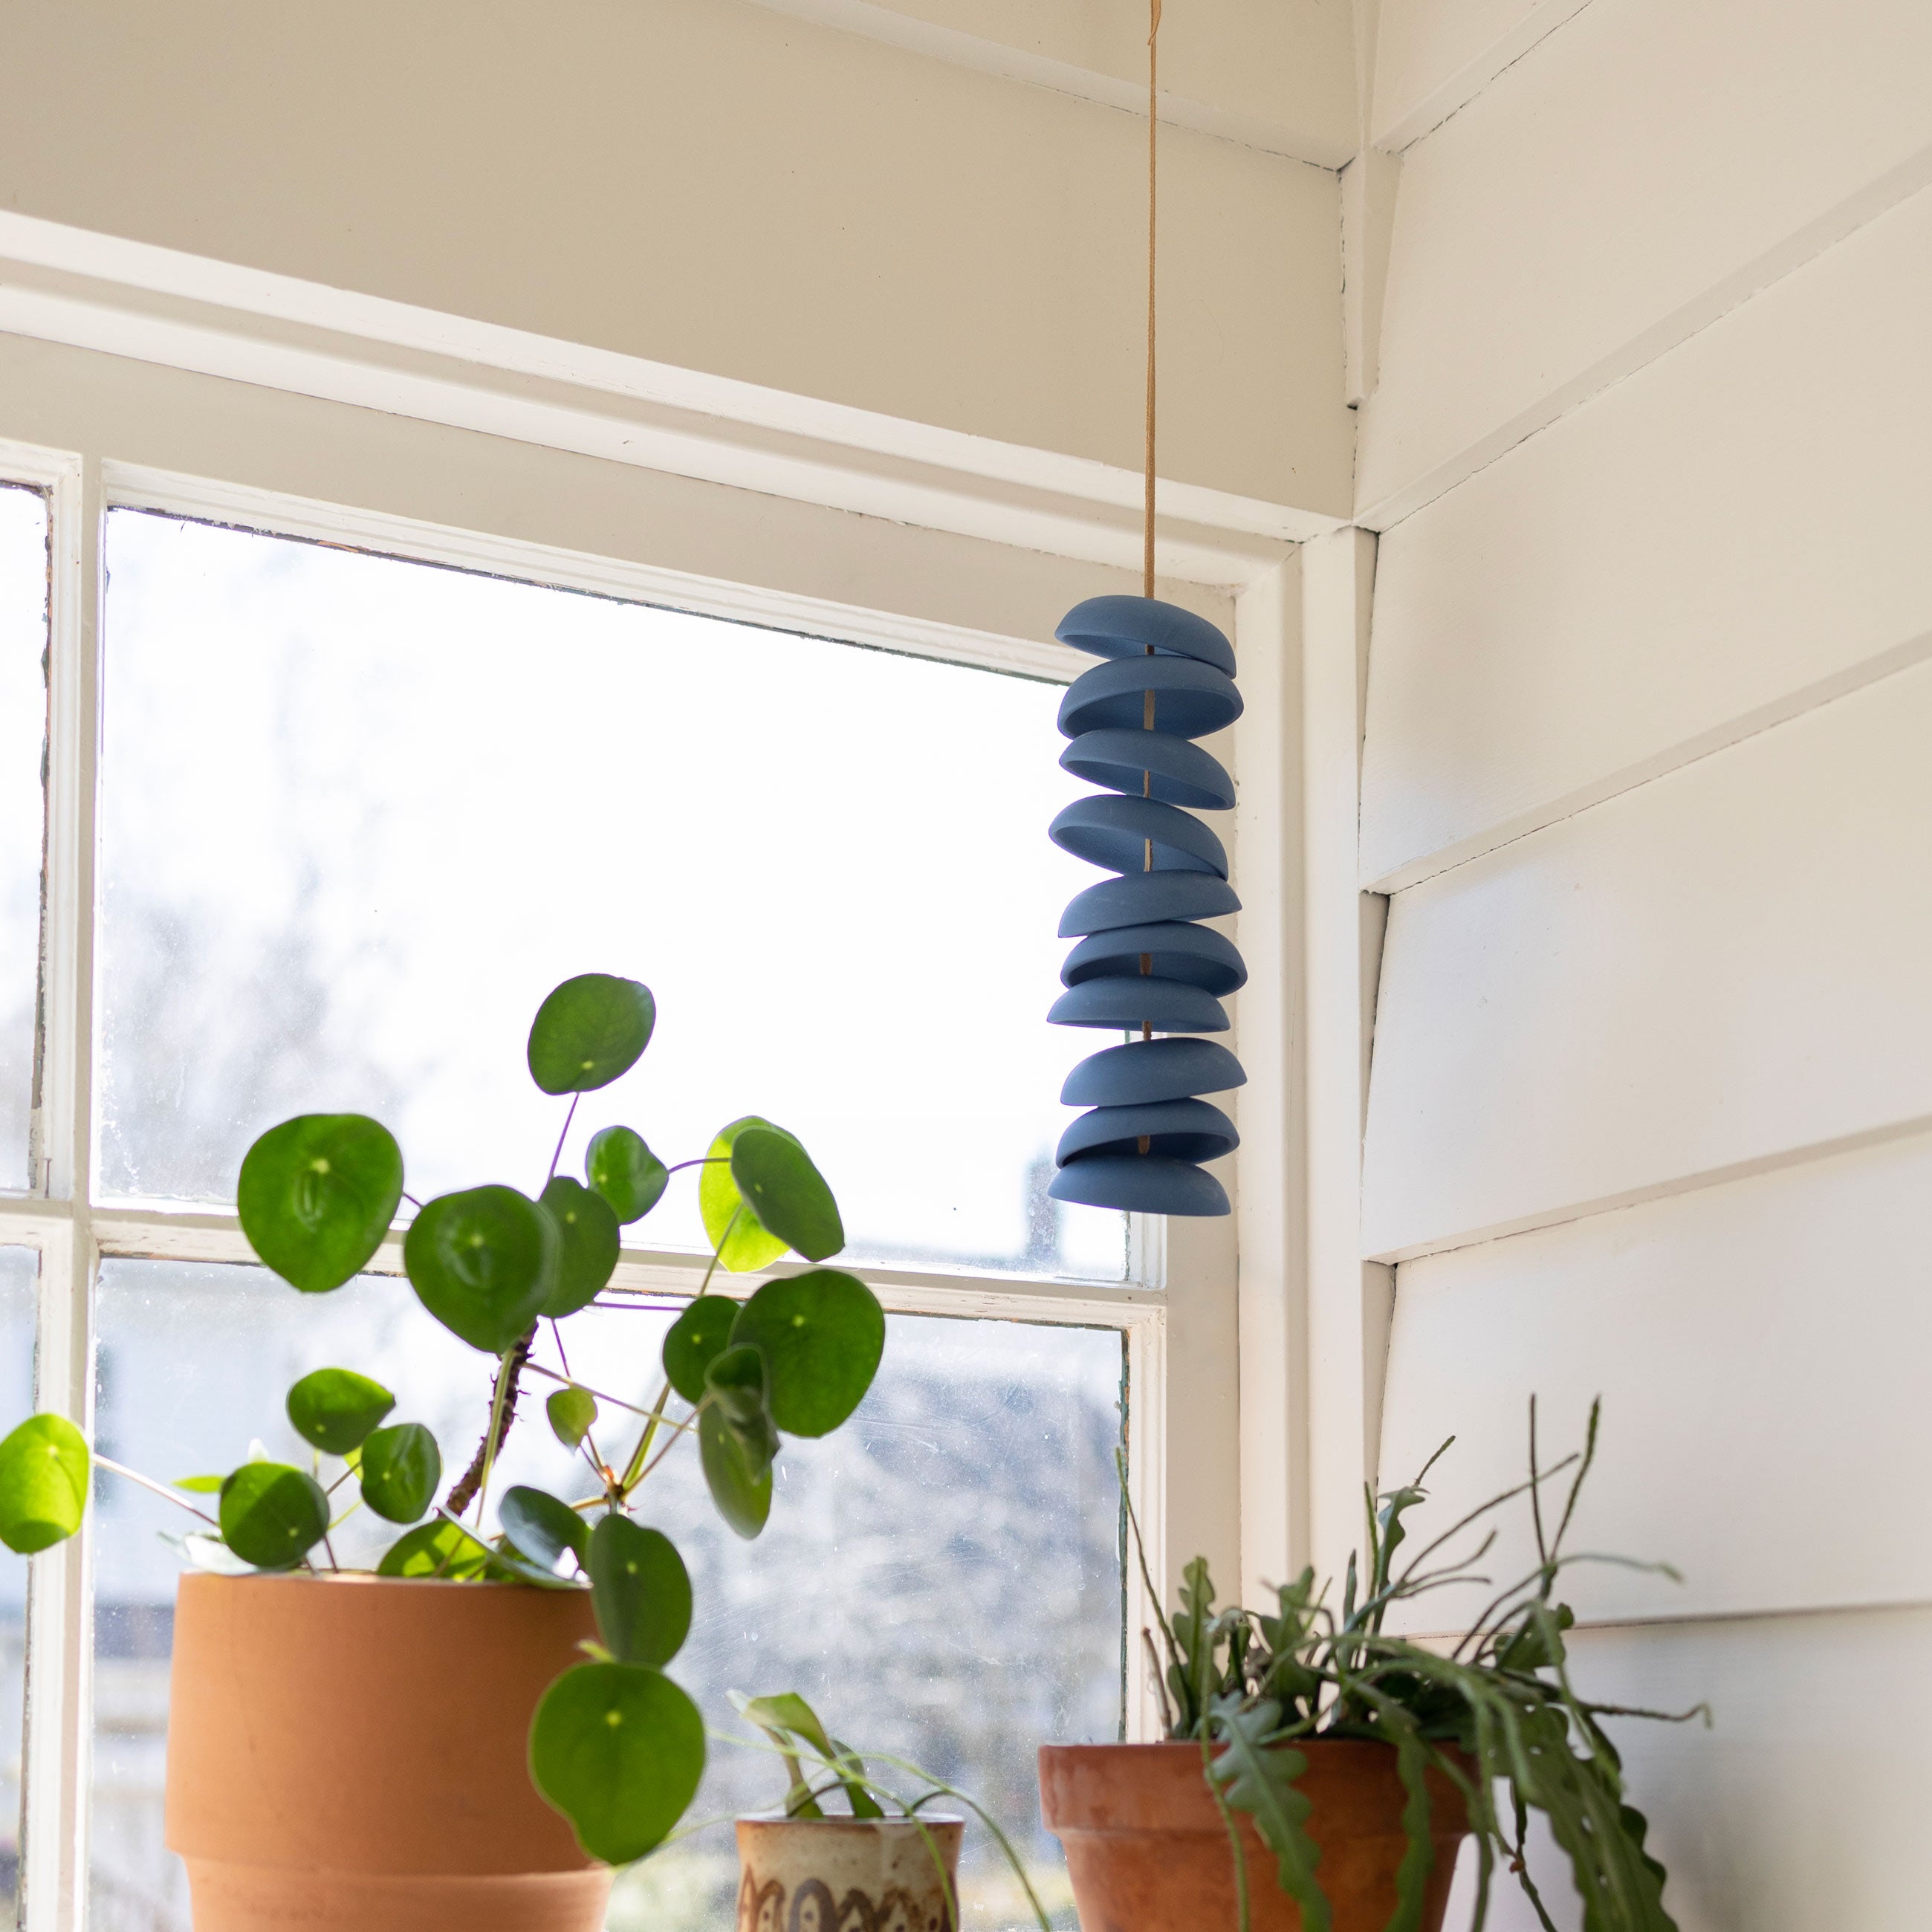 Wind-chime hanging above plants in terracotta planters. 